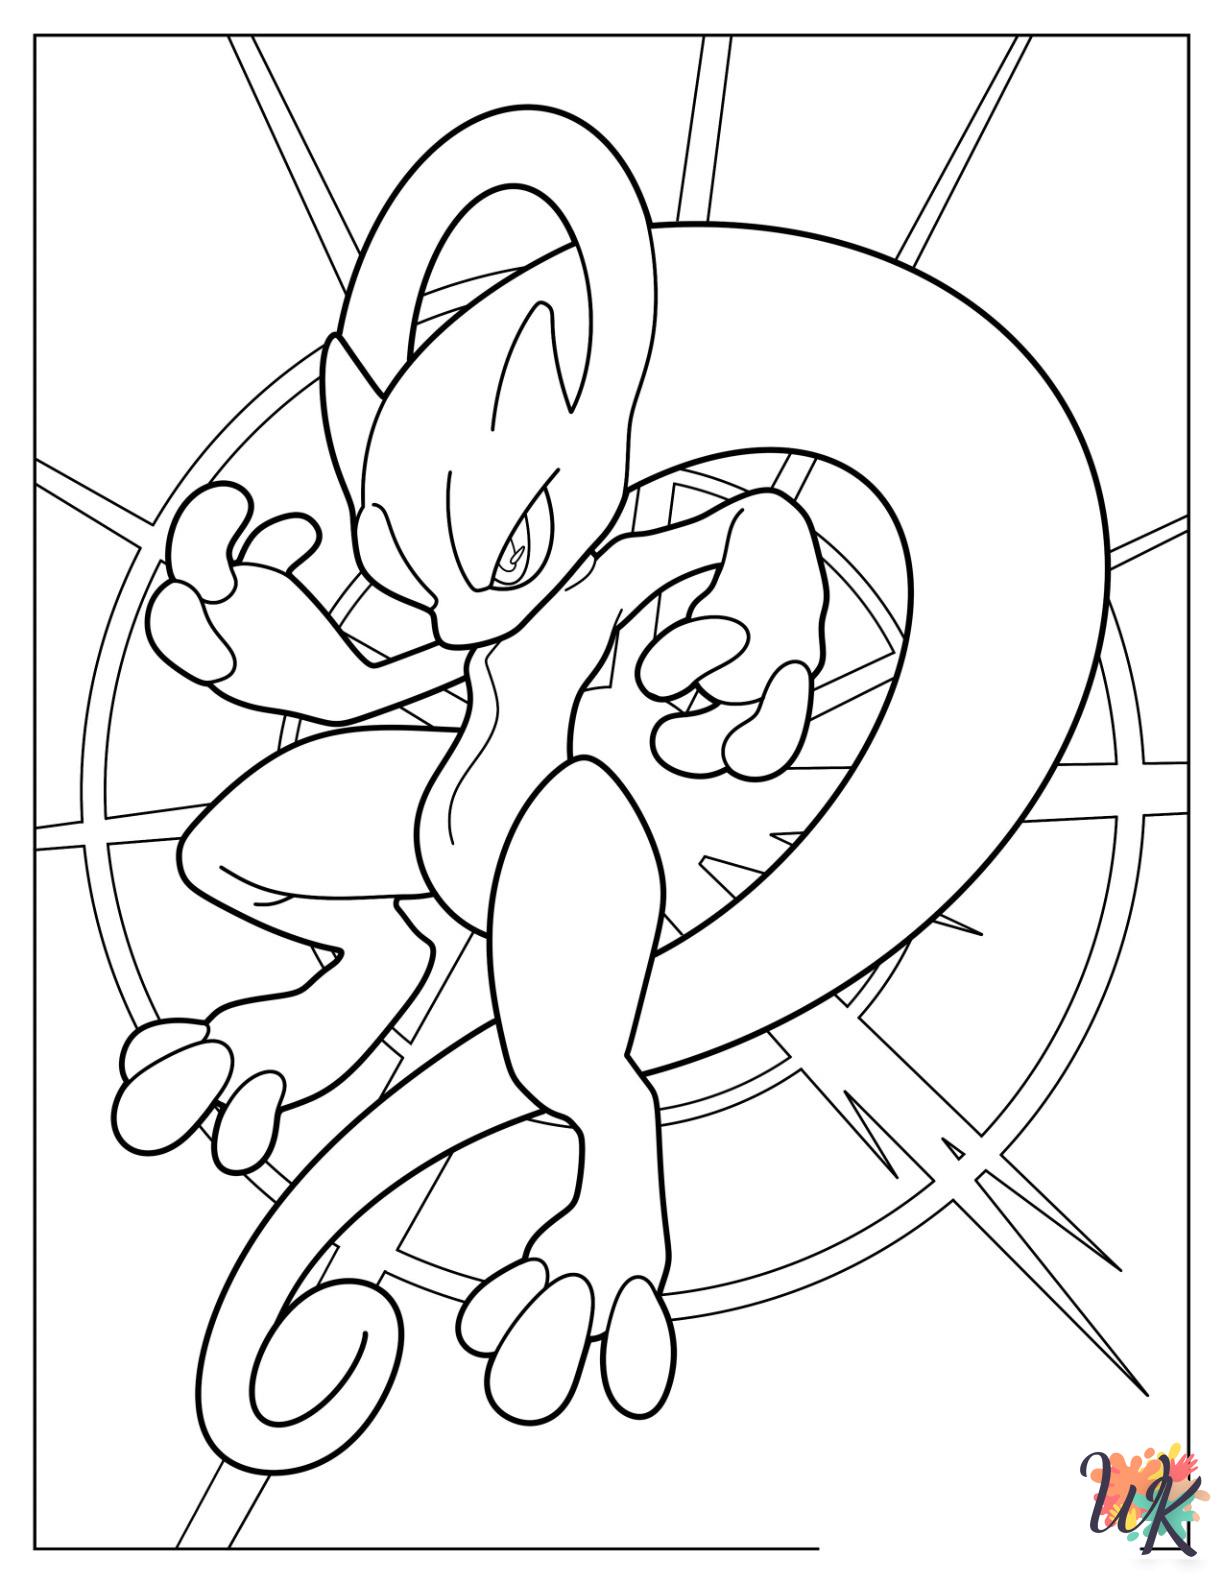 printable Legendary Pokemon coloring pages for adults 1